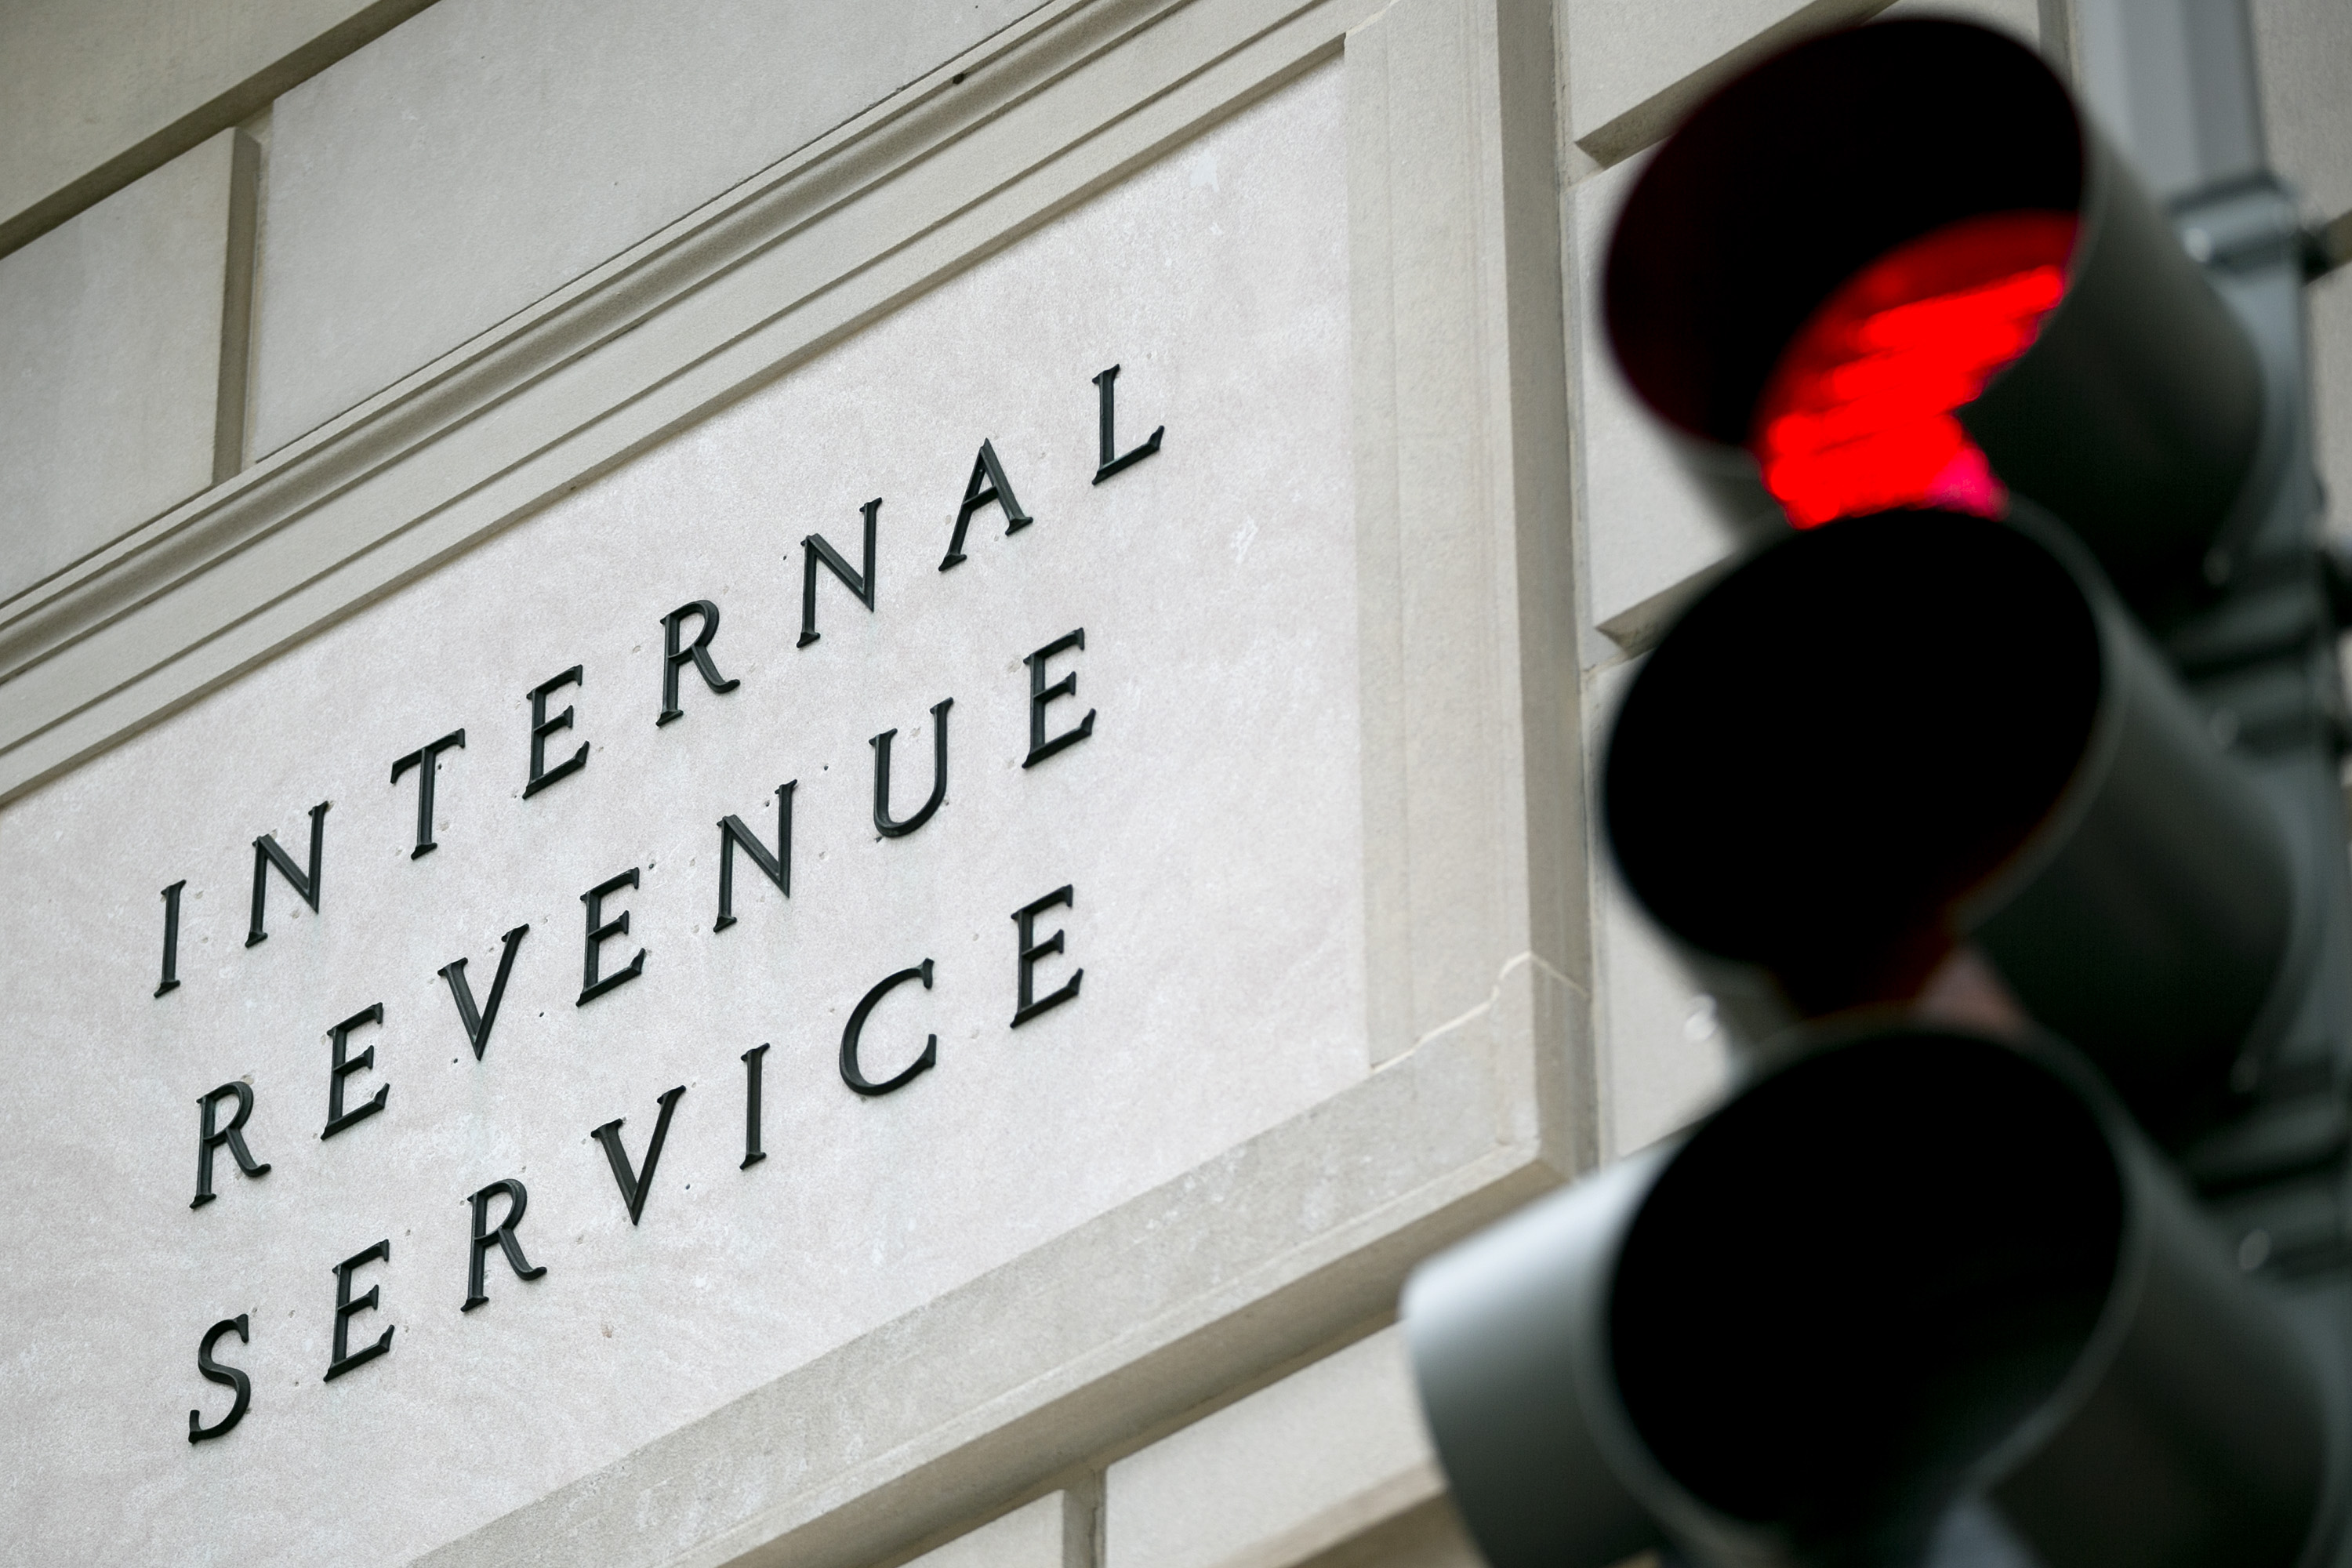 The Internal Revenue Service (IRS) building stands in Washington, D.C., U.S., May 15, 2013. (Bloomberg/Getty Images)